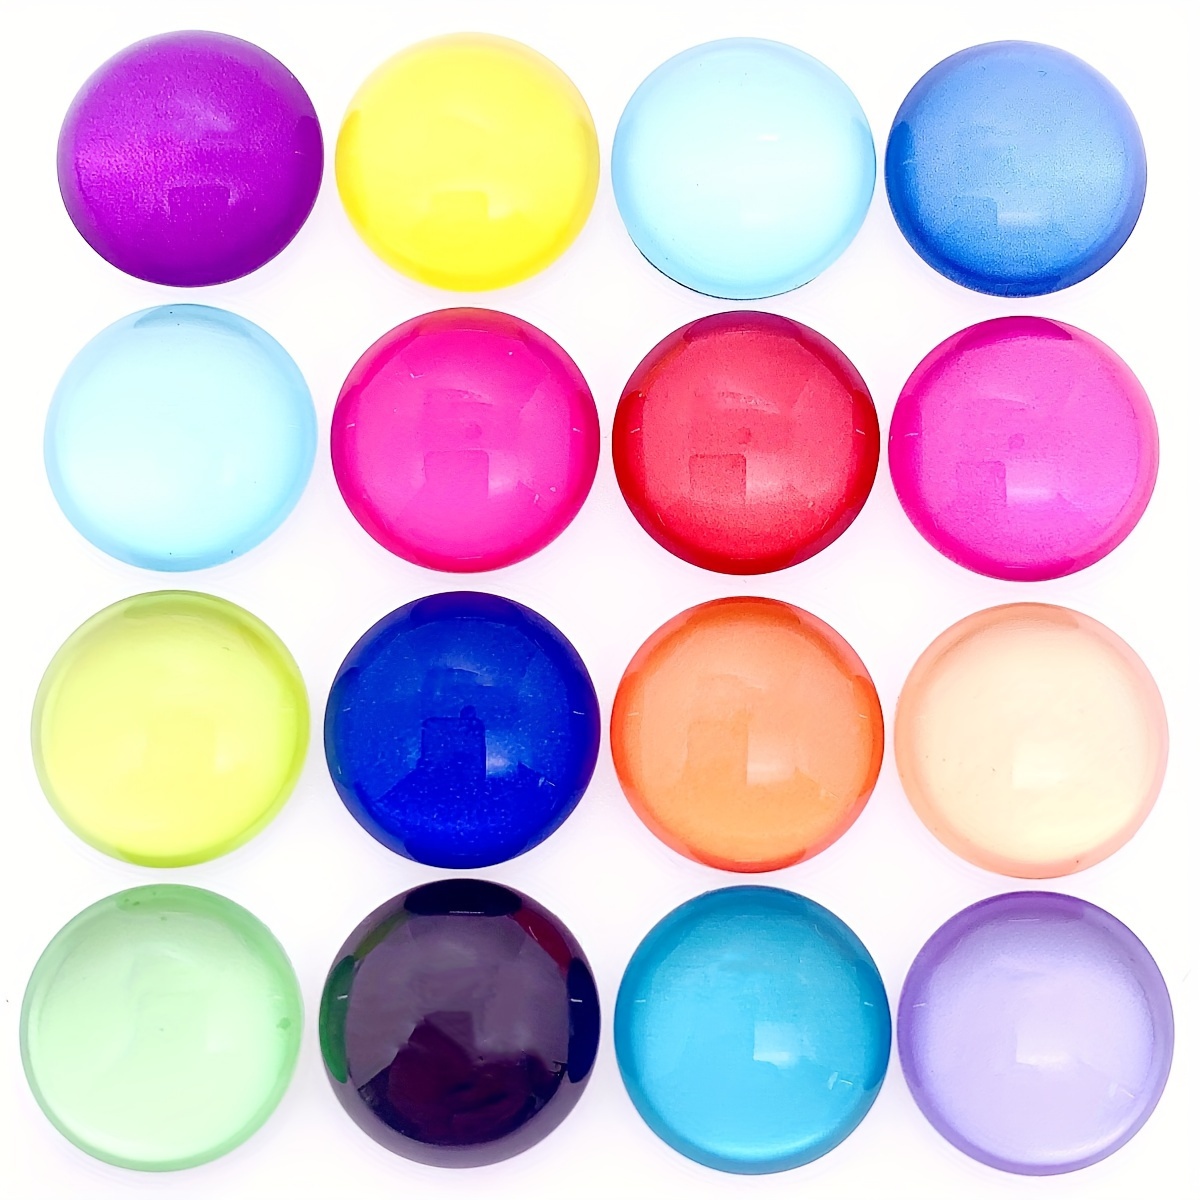 

20pcs 20mm Round Multicolor Solid Glass Cabochon Beads, Colorful Glass Dome Beads, For Diy Crafts & Jewelry Making, Scrapbooking Decors